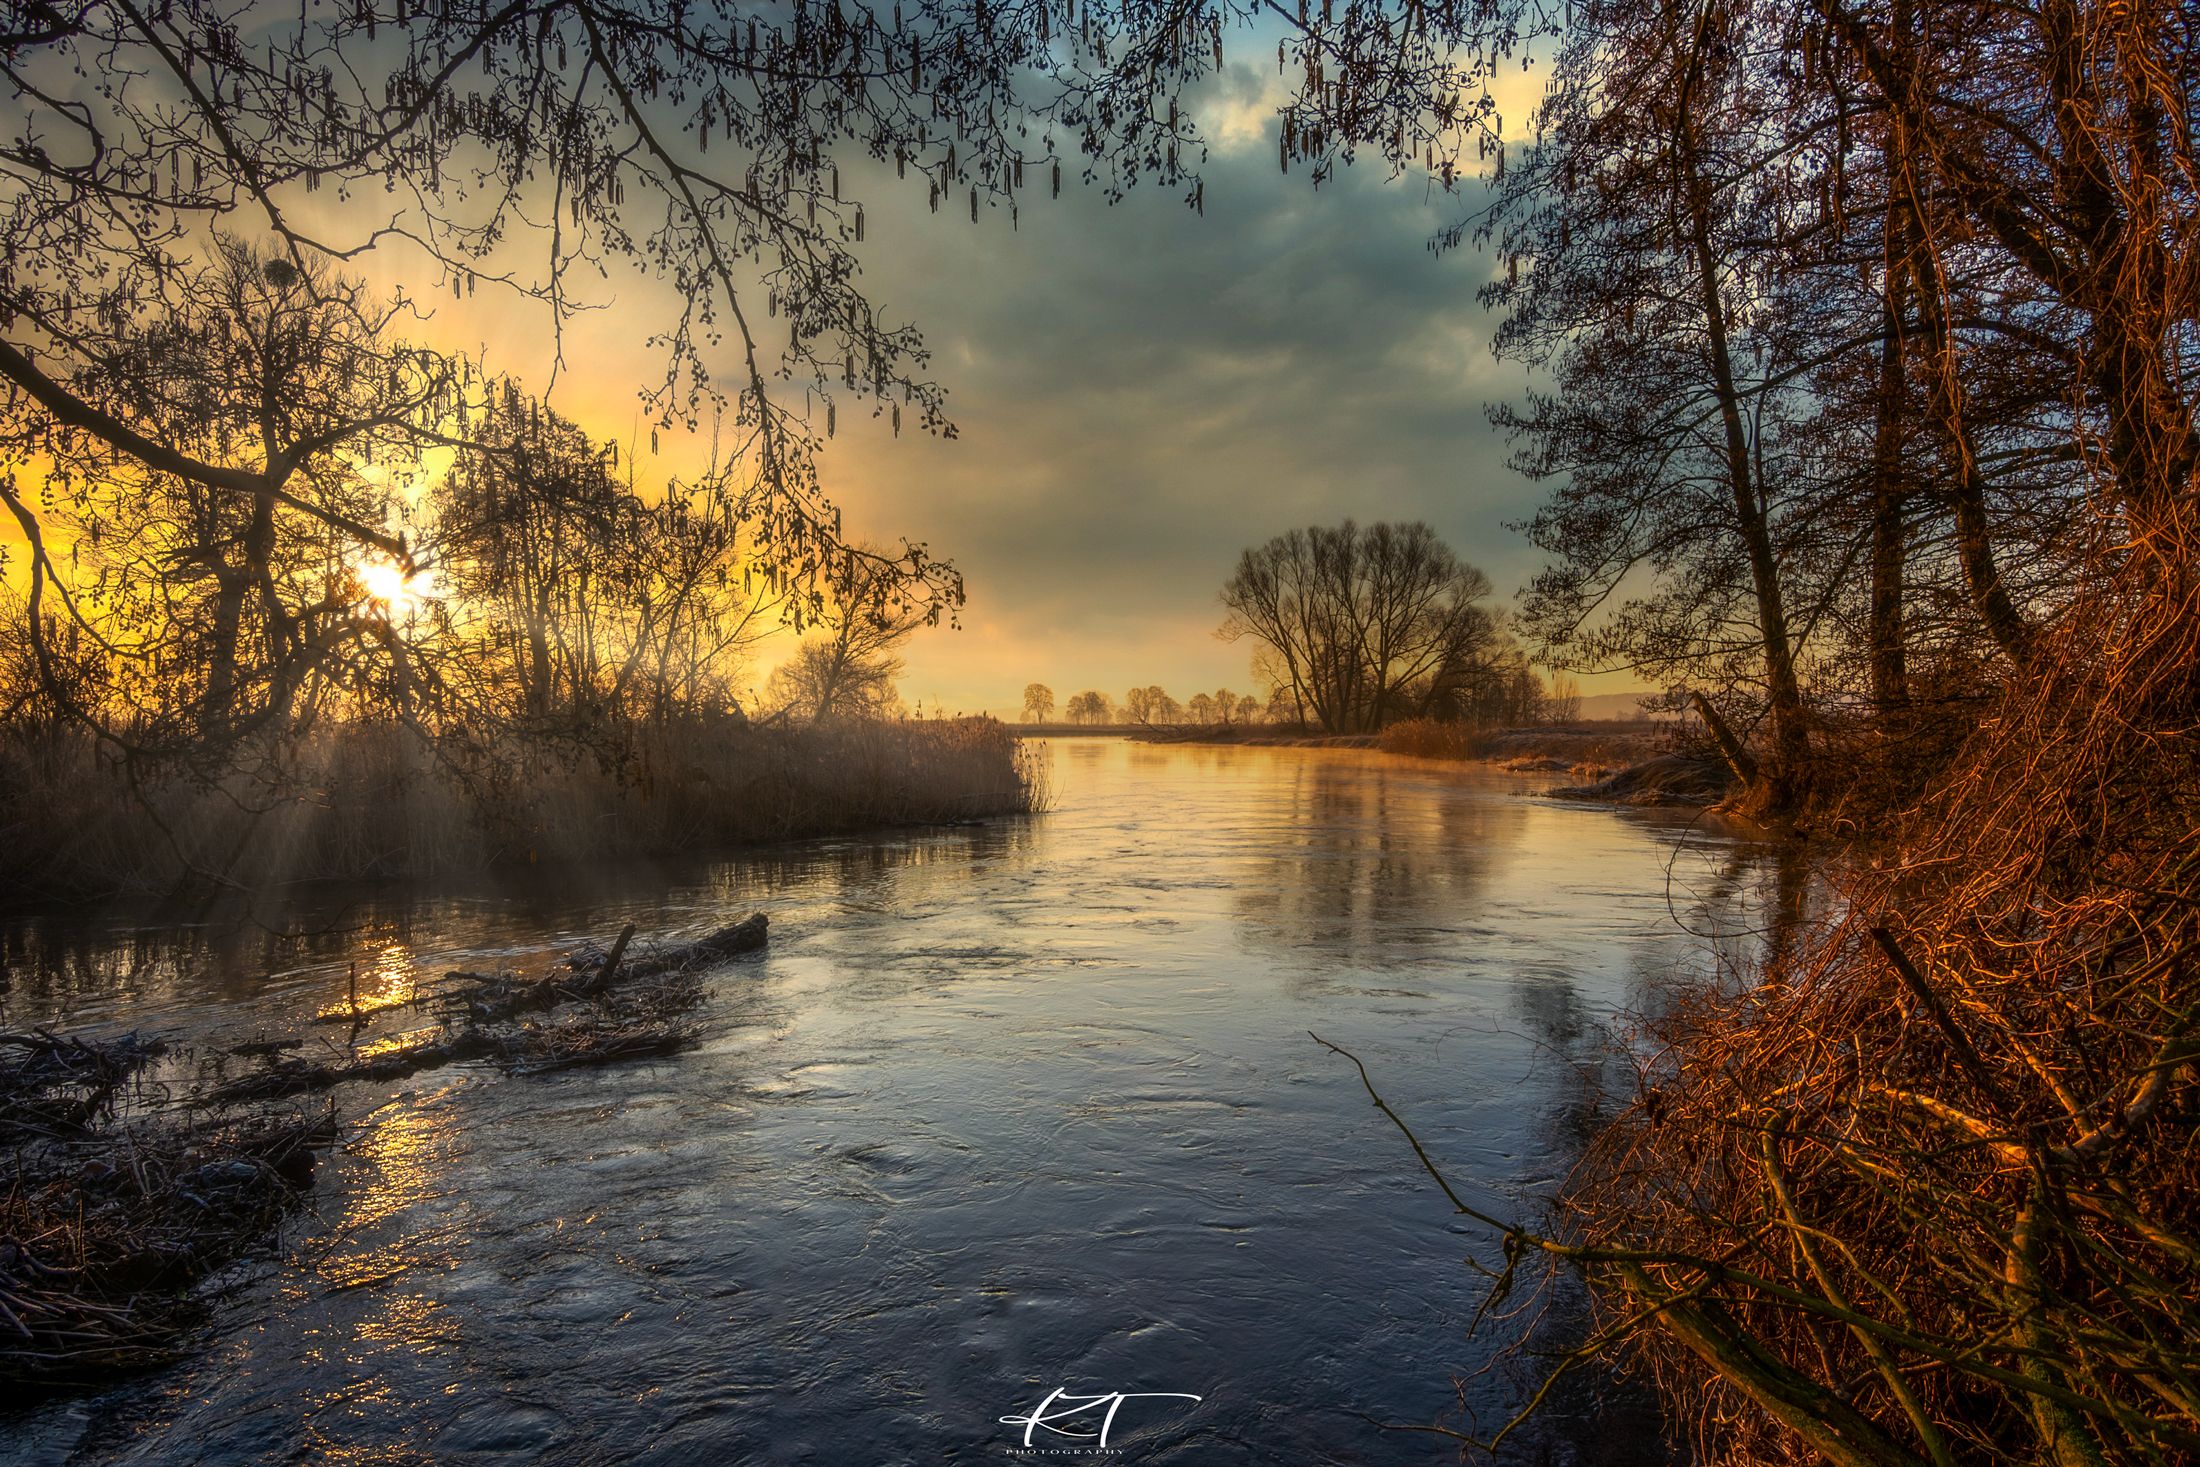 landscape  sunrise  sunlight  water  river  Gwda  nature  trees  reflection in the water  february 2022  memories  calm  atmosphere  winter 2022  sky  clouds  Beauty In Nature  Photography  No People, Tollas Krzysztof